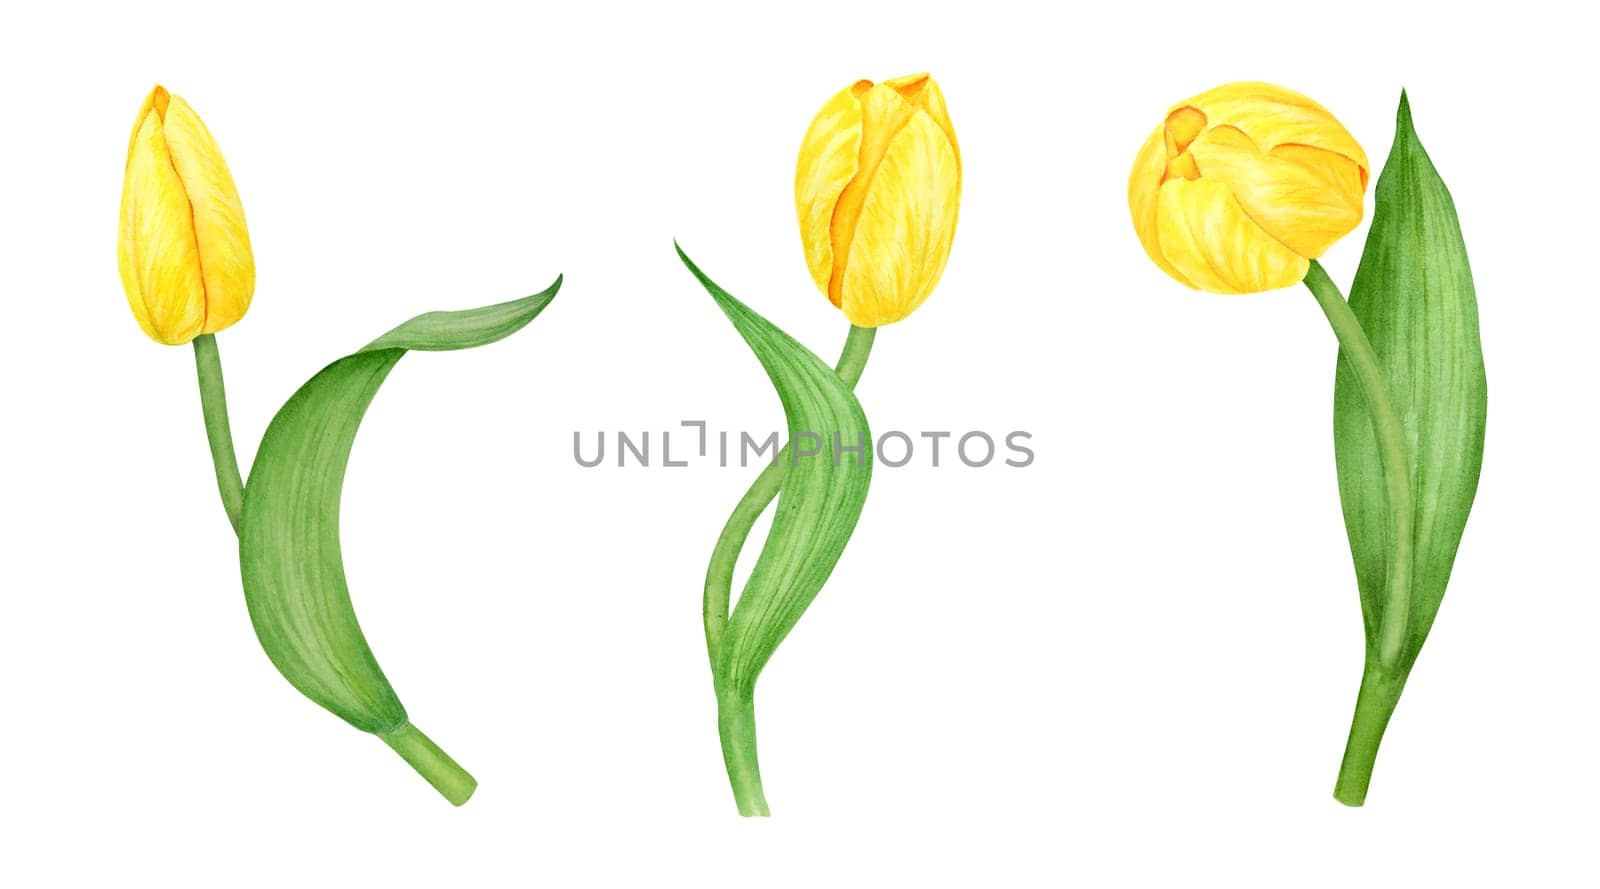 Yellow tulip. Watercolor hand drawn illustration of spring symbol, golden flower. Clip art for Easter, Mothers Day, Womens Day, March 8 cards, wedding, farmer and floristic prints, travelbooks, packing